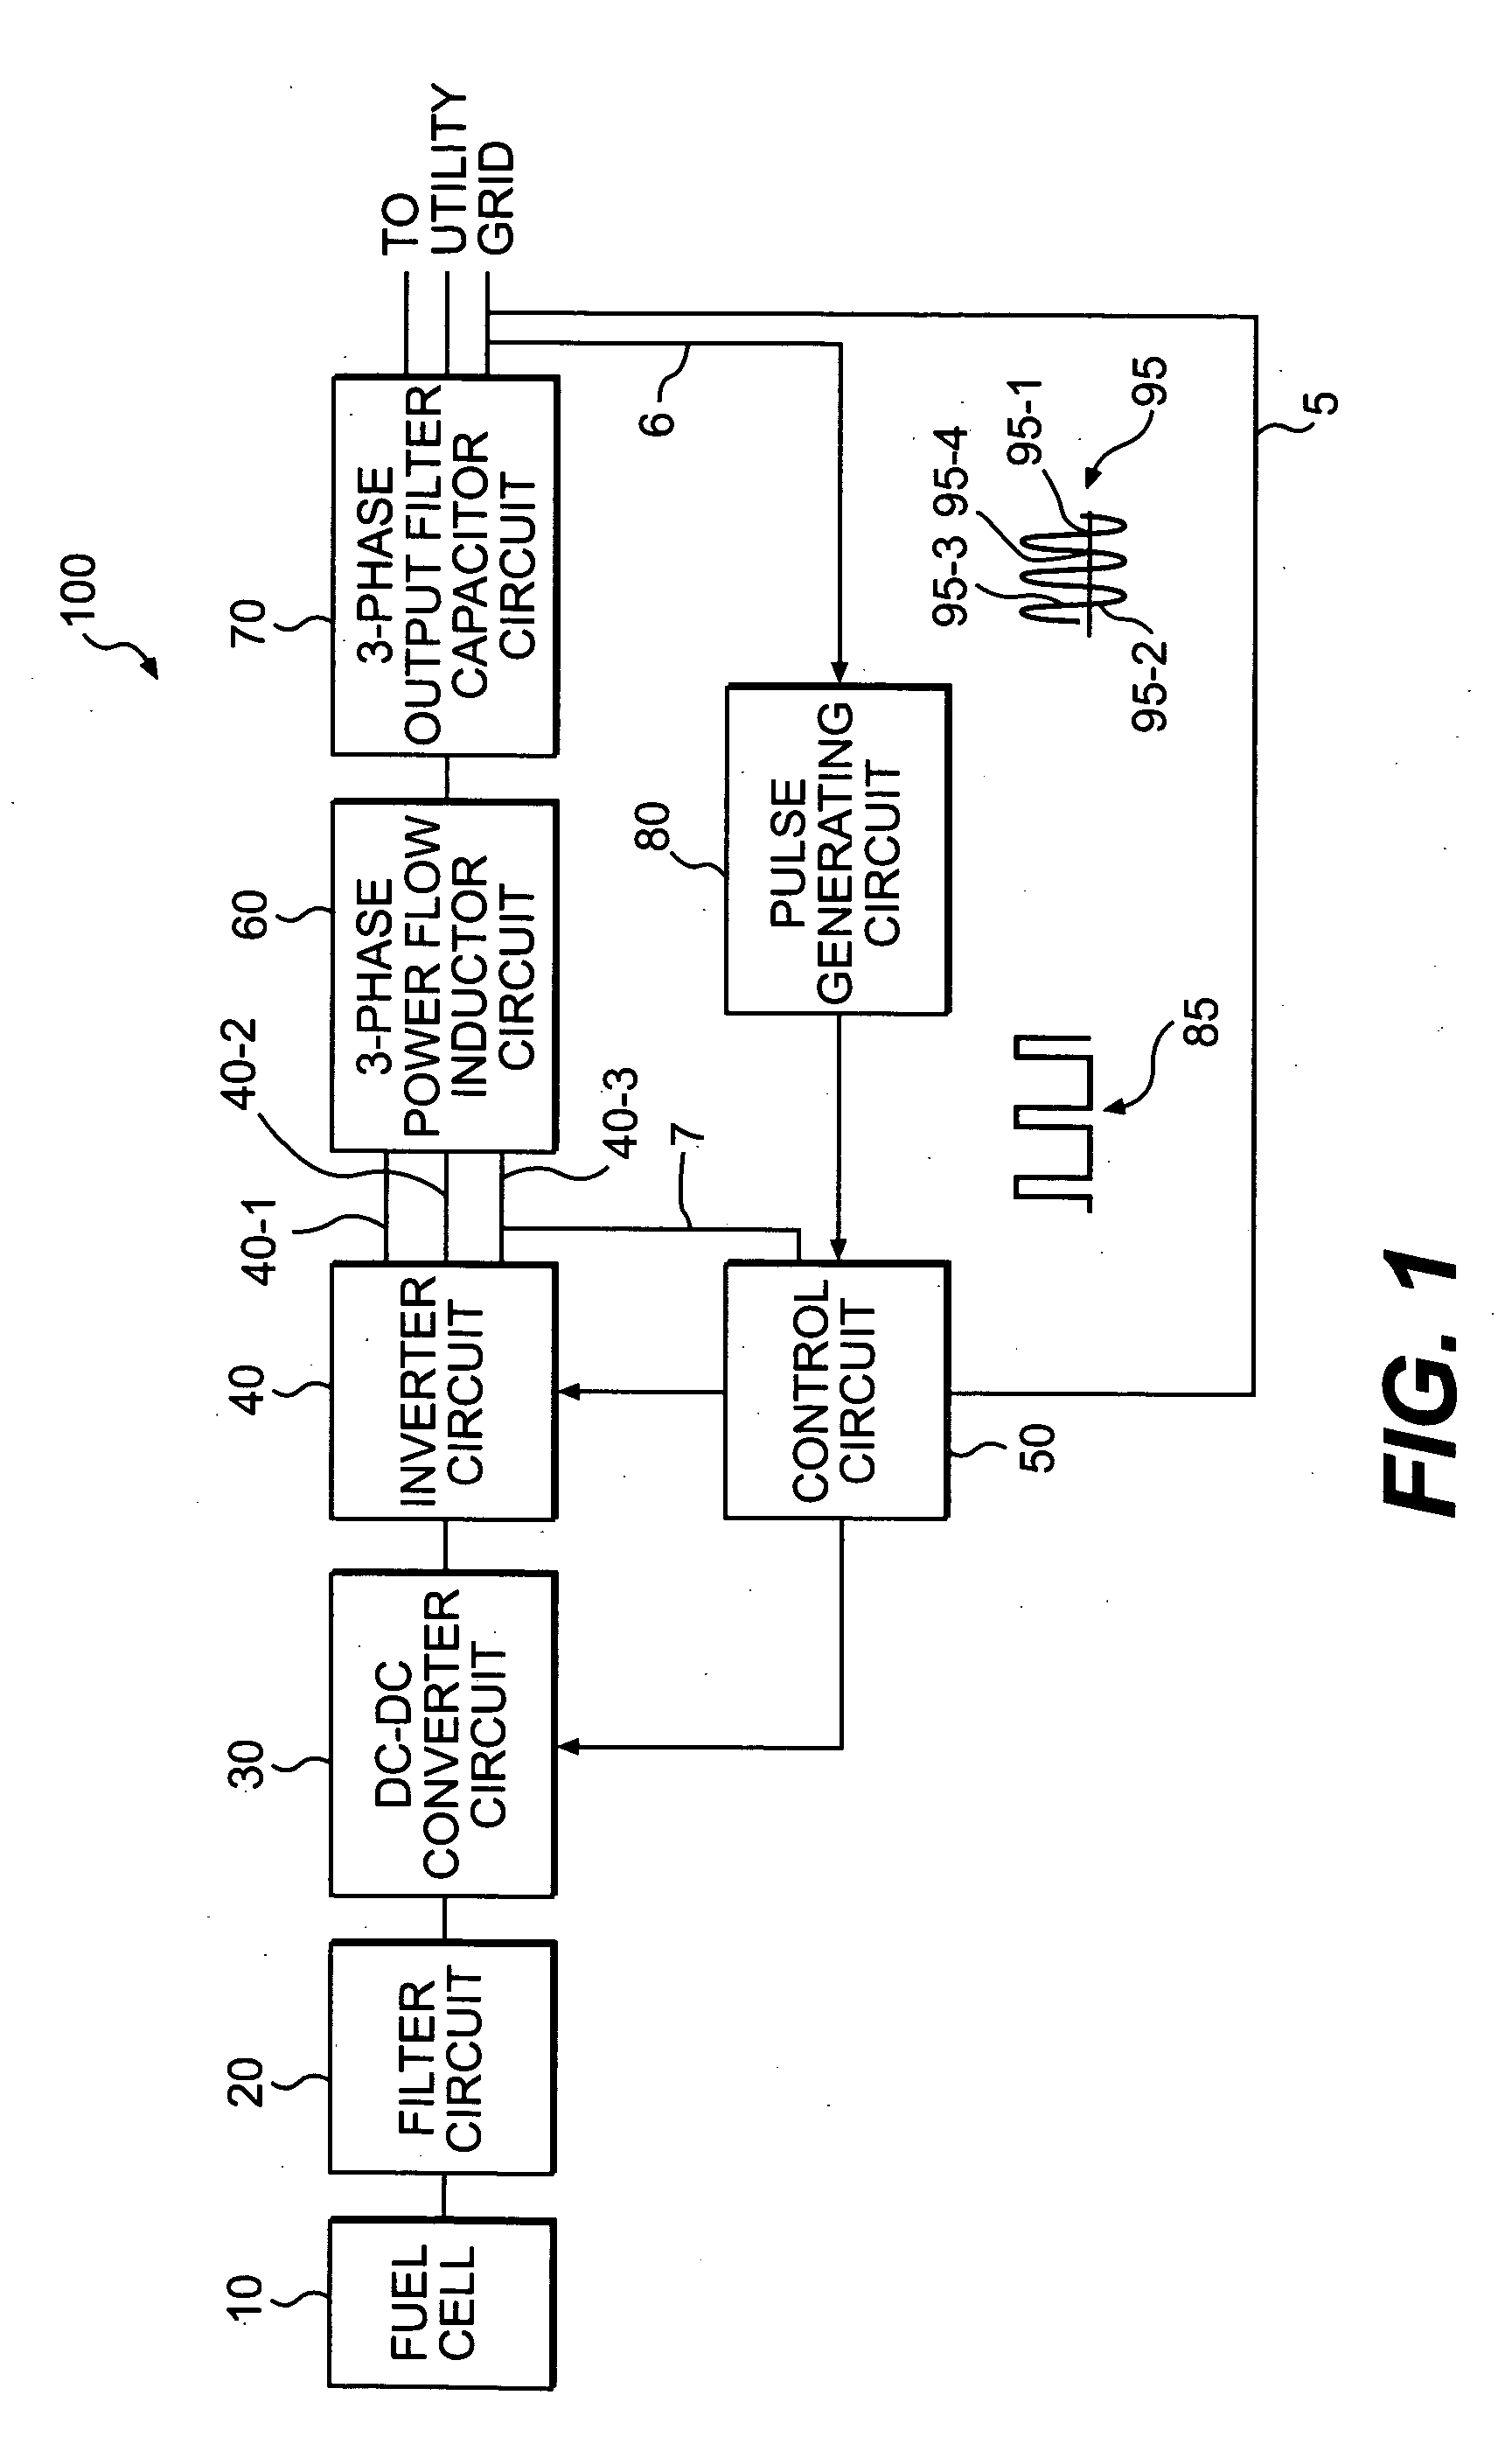 Power converter in a utility interactive system